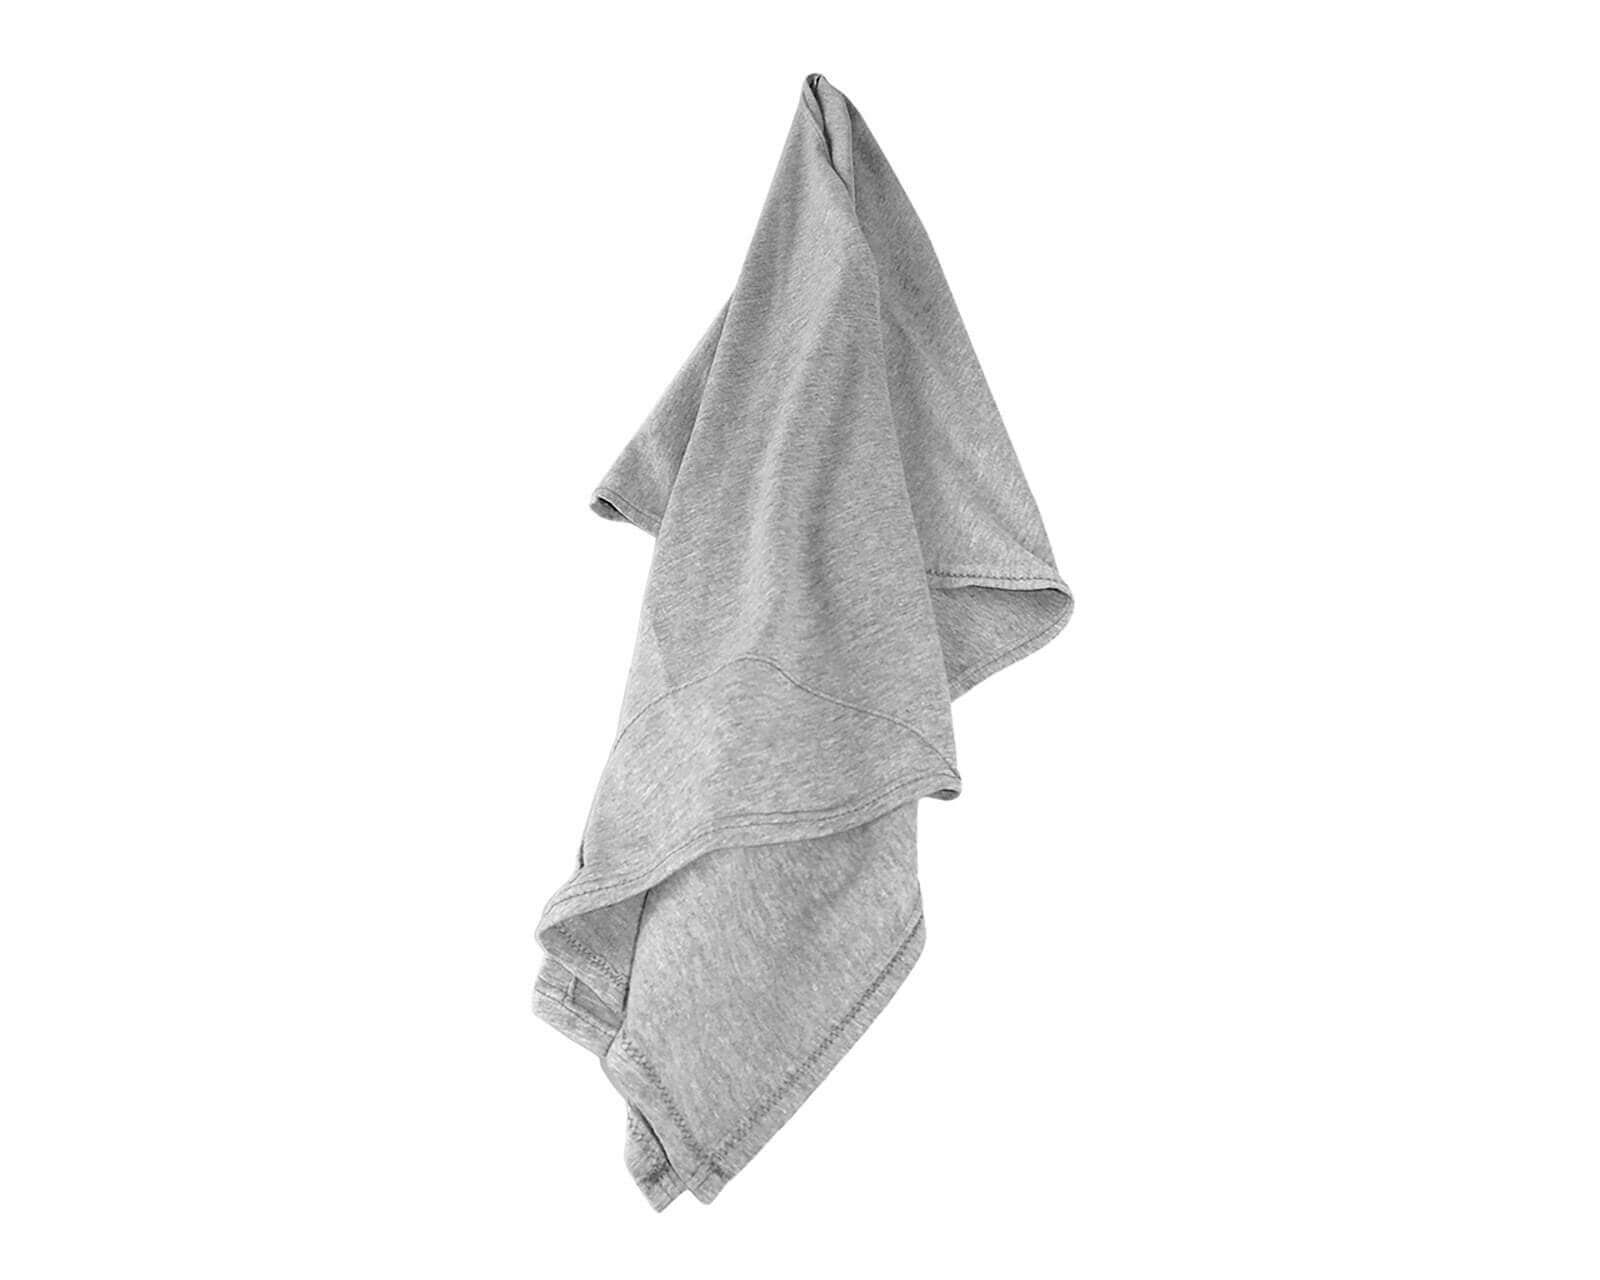 Heathered Gray T-Shirt Hair Towel for Curly, Wavy, and Straight Hair - Soft, Absorbent, and Eco-Friendly